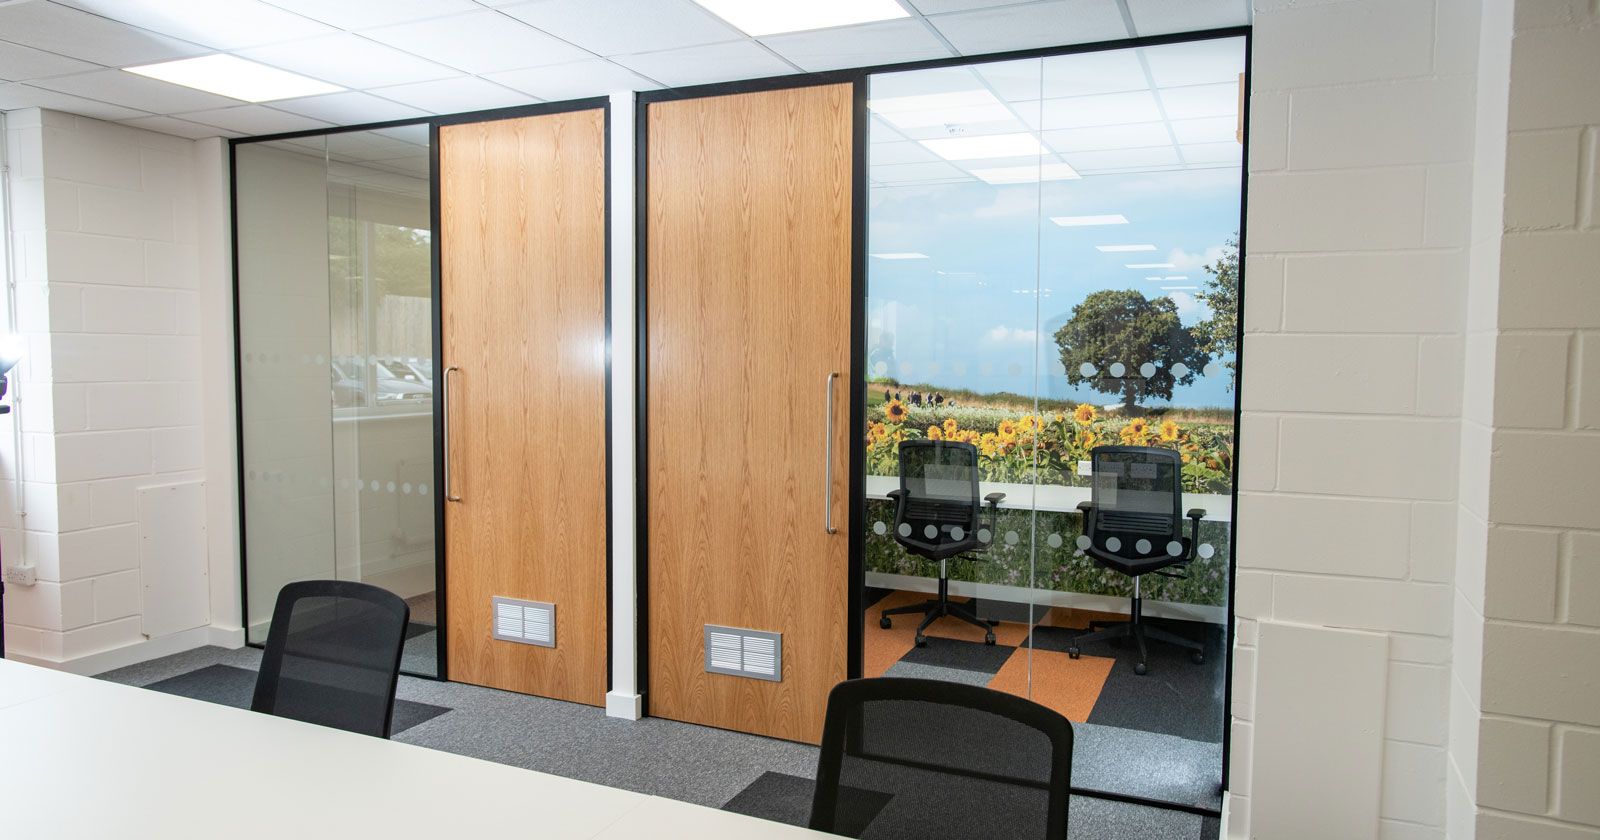 Elsoms-Seeds-Zoom-Meeting-Rooms-with-Glass-Partitions By APSS